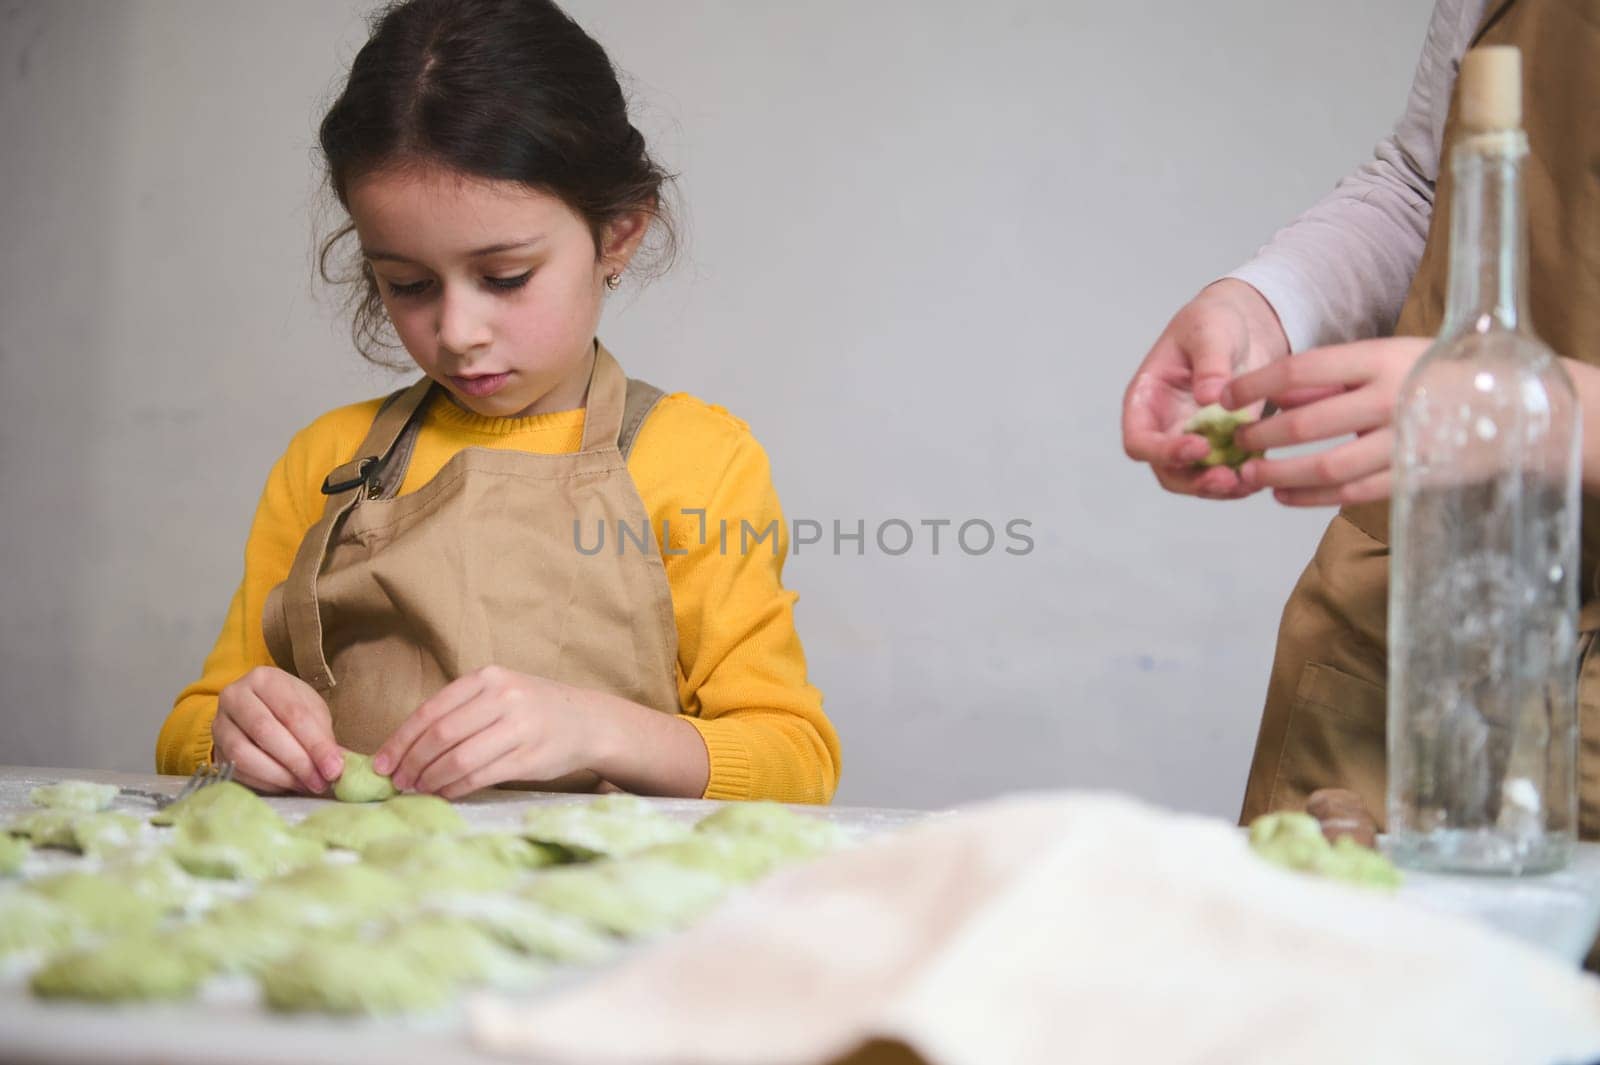 Children learning making dumplings during a cooking class. Preparing homemade varennyky according to traditional Ukrainian recipe by artgf